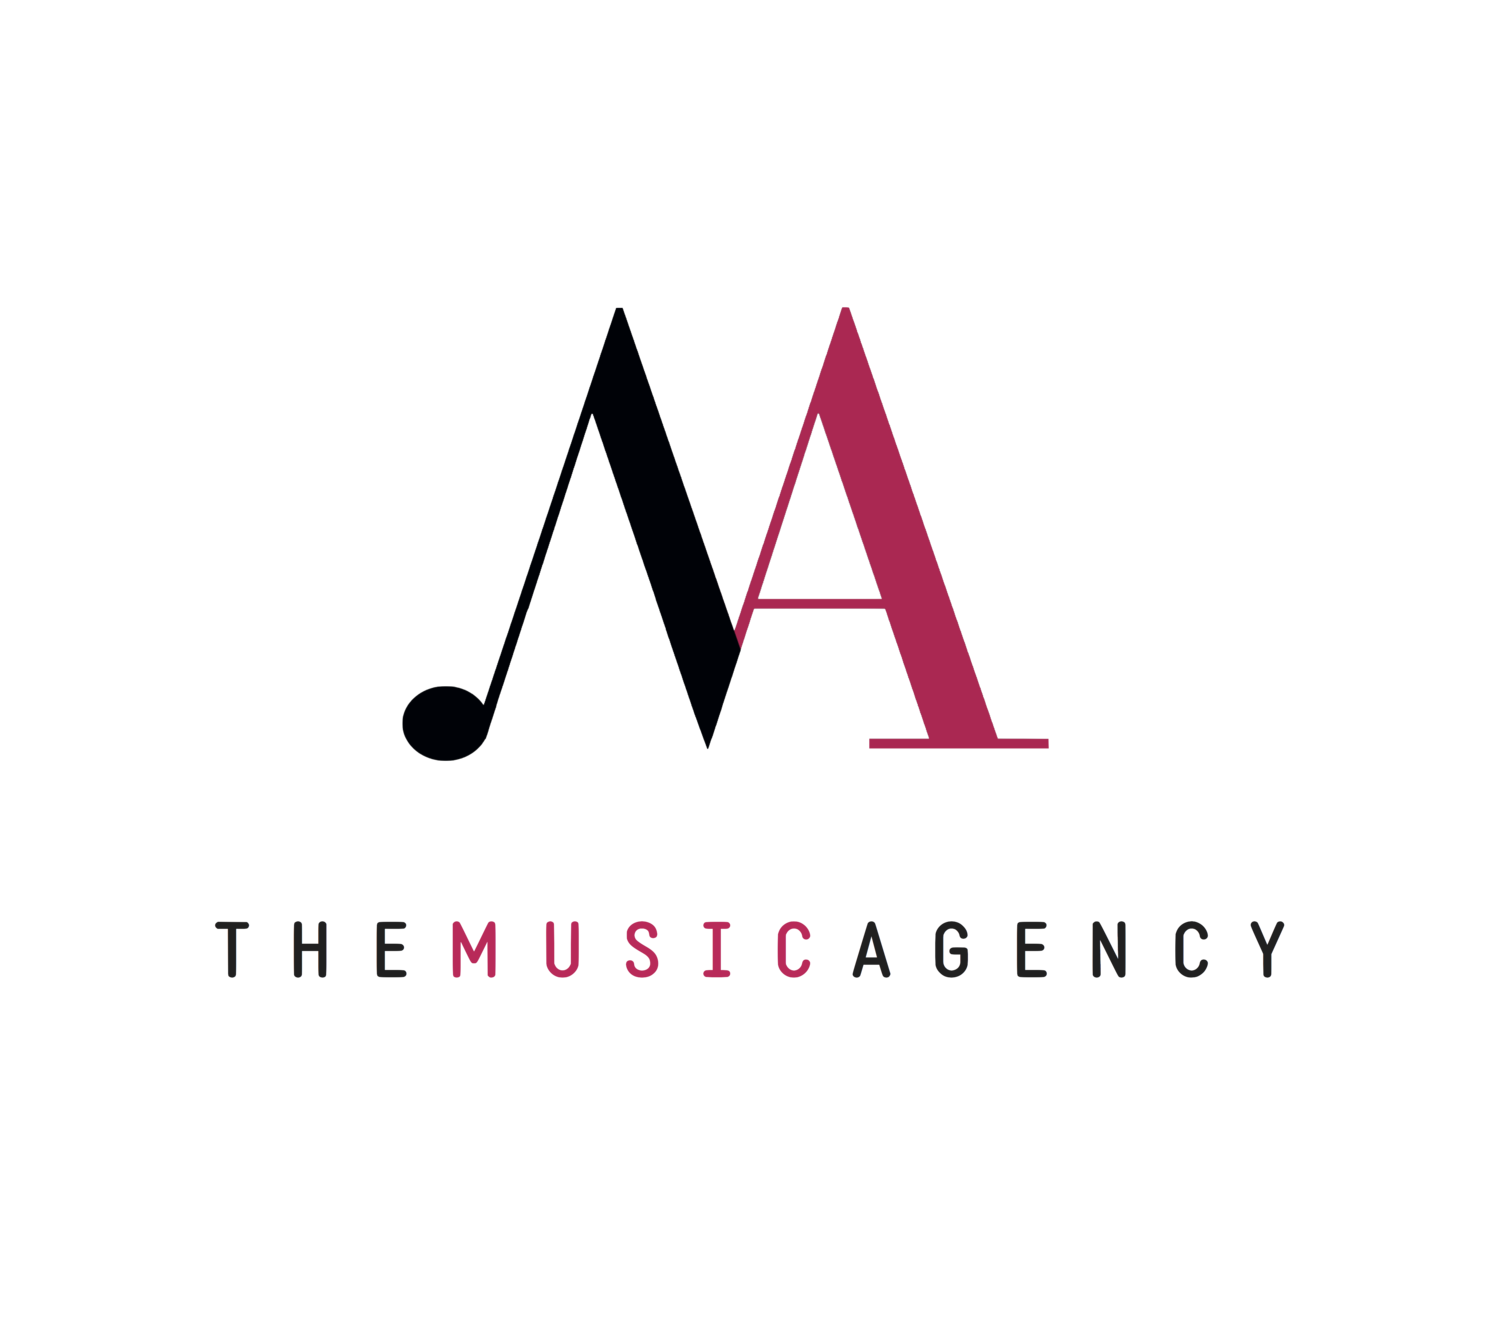 The Music Agency